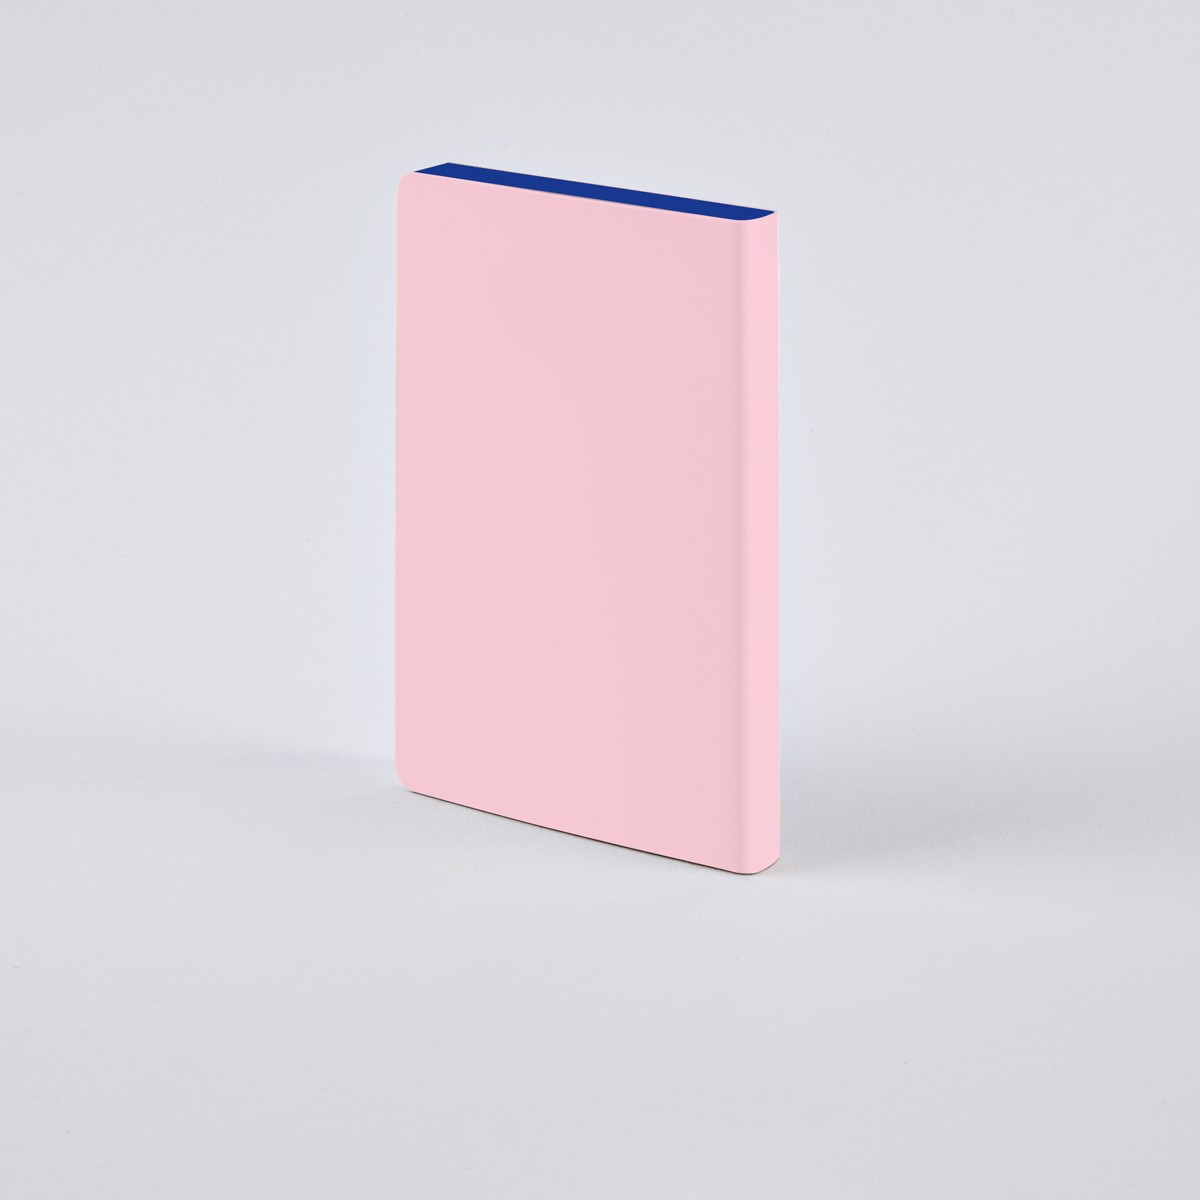 Nuuna Notebook Graphic S - PLAYFUL THOUGHTS